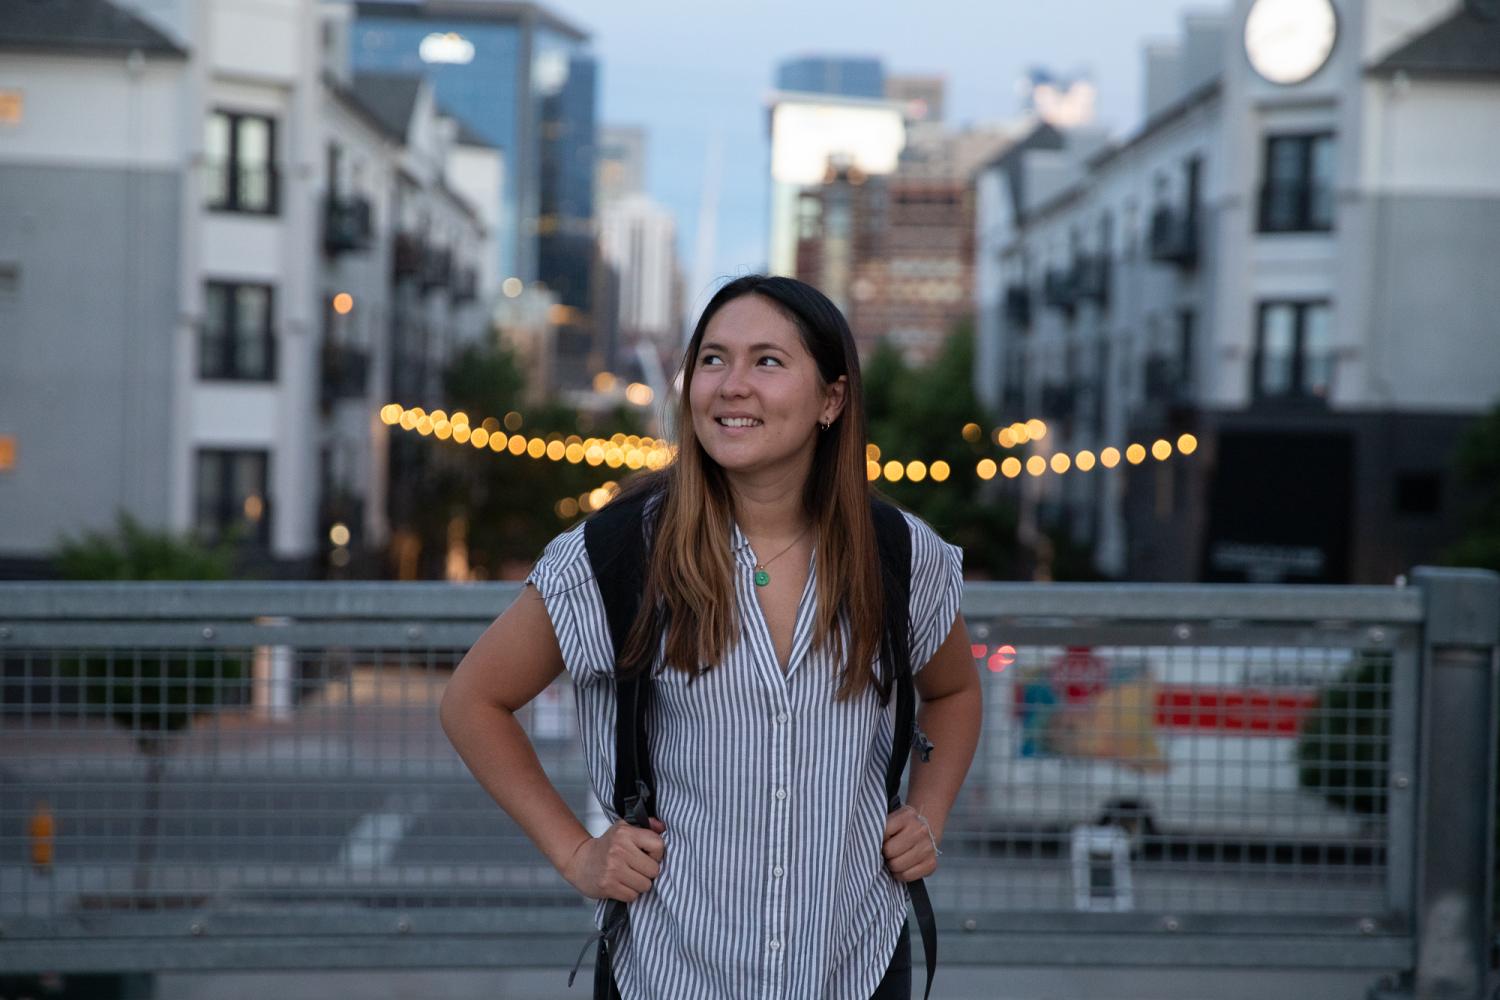 A student wearing a backpack smiles as she poses outside in Denver